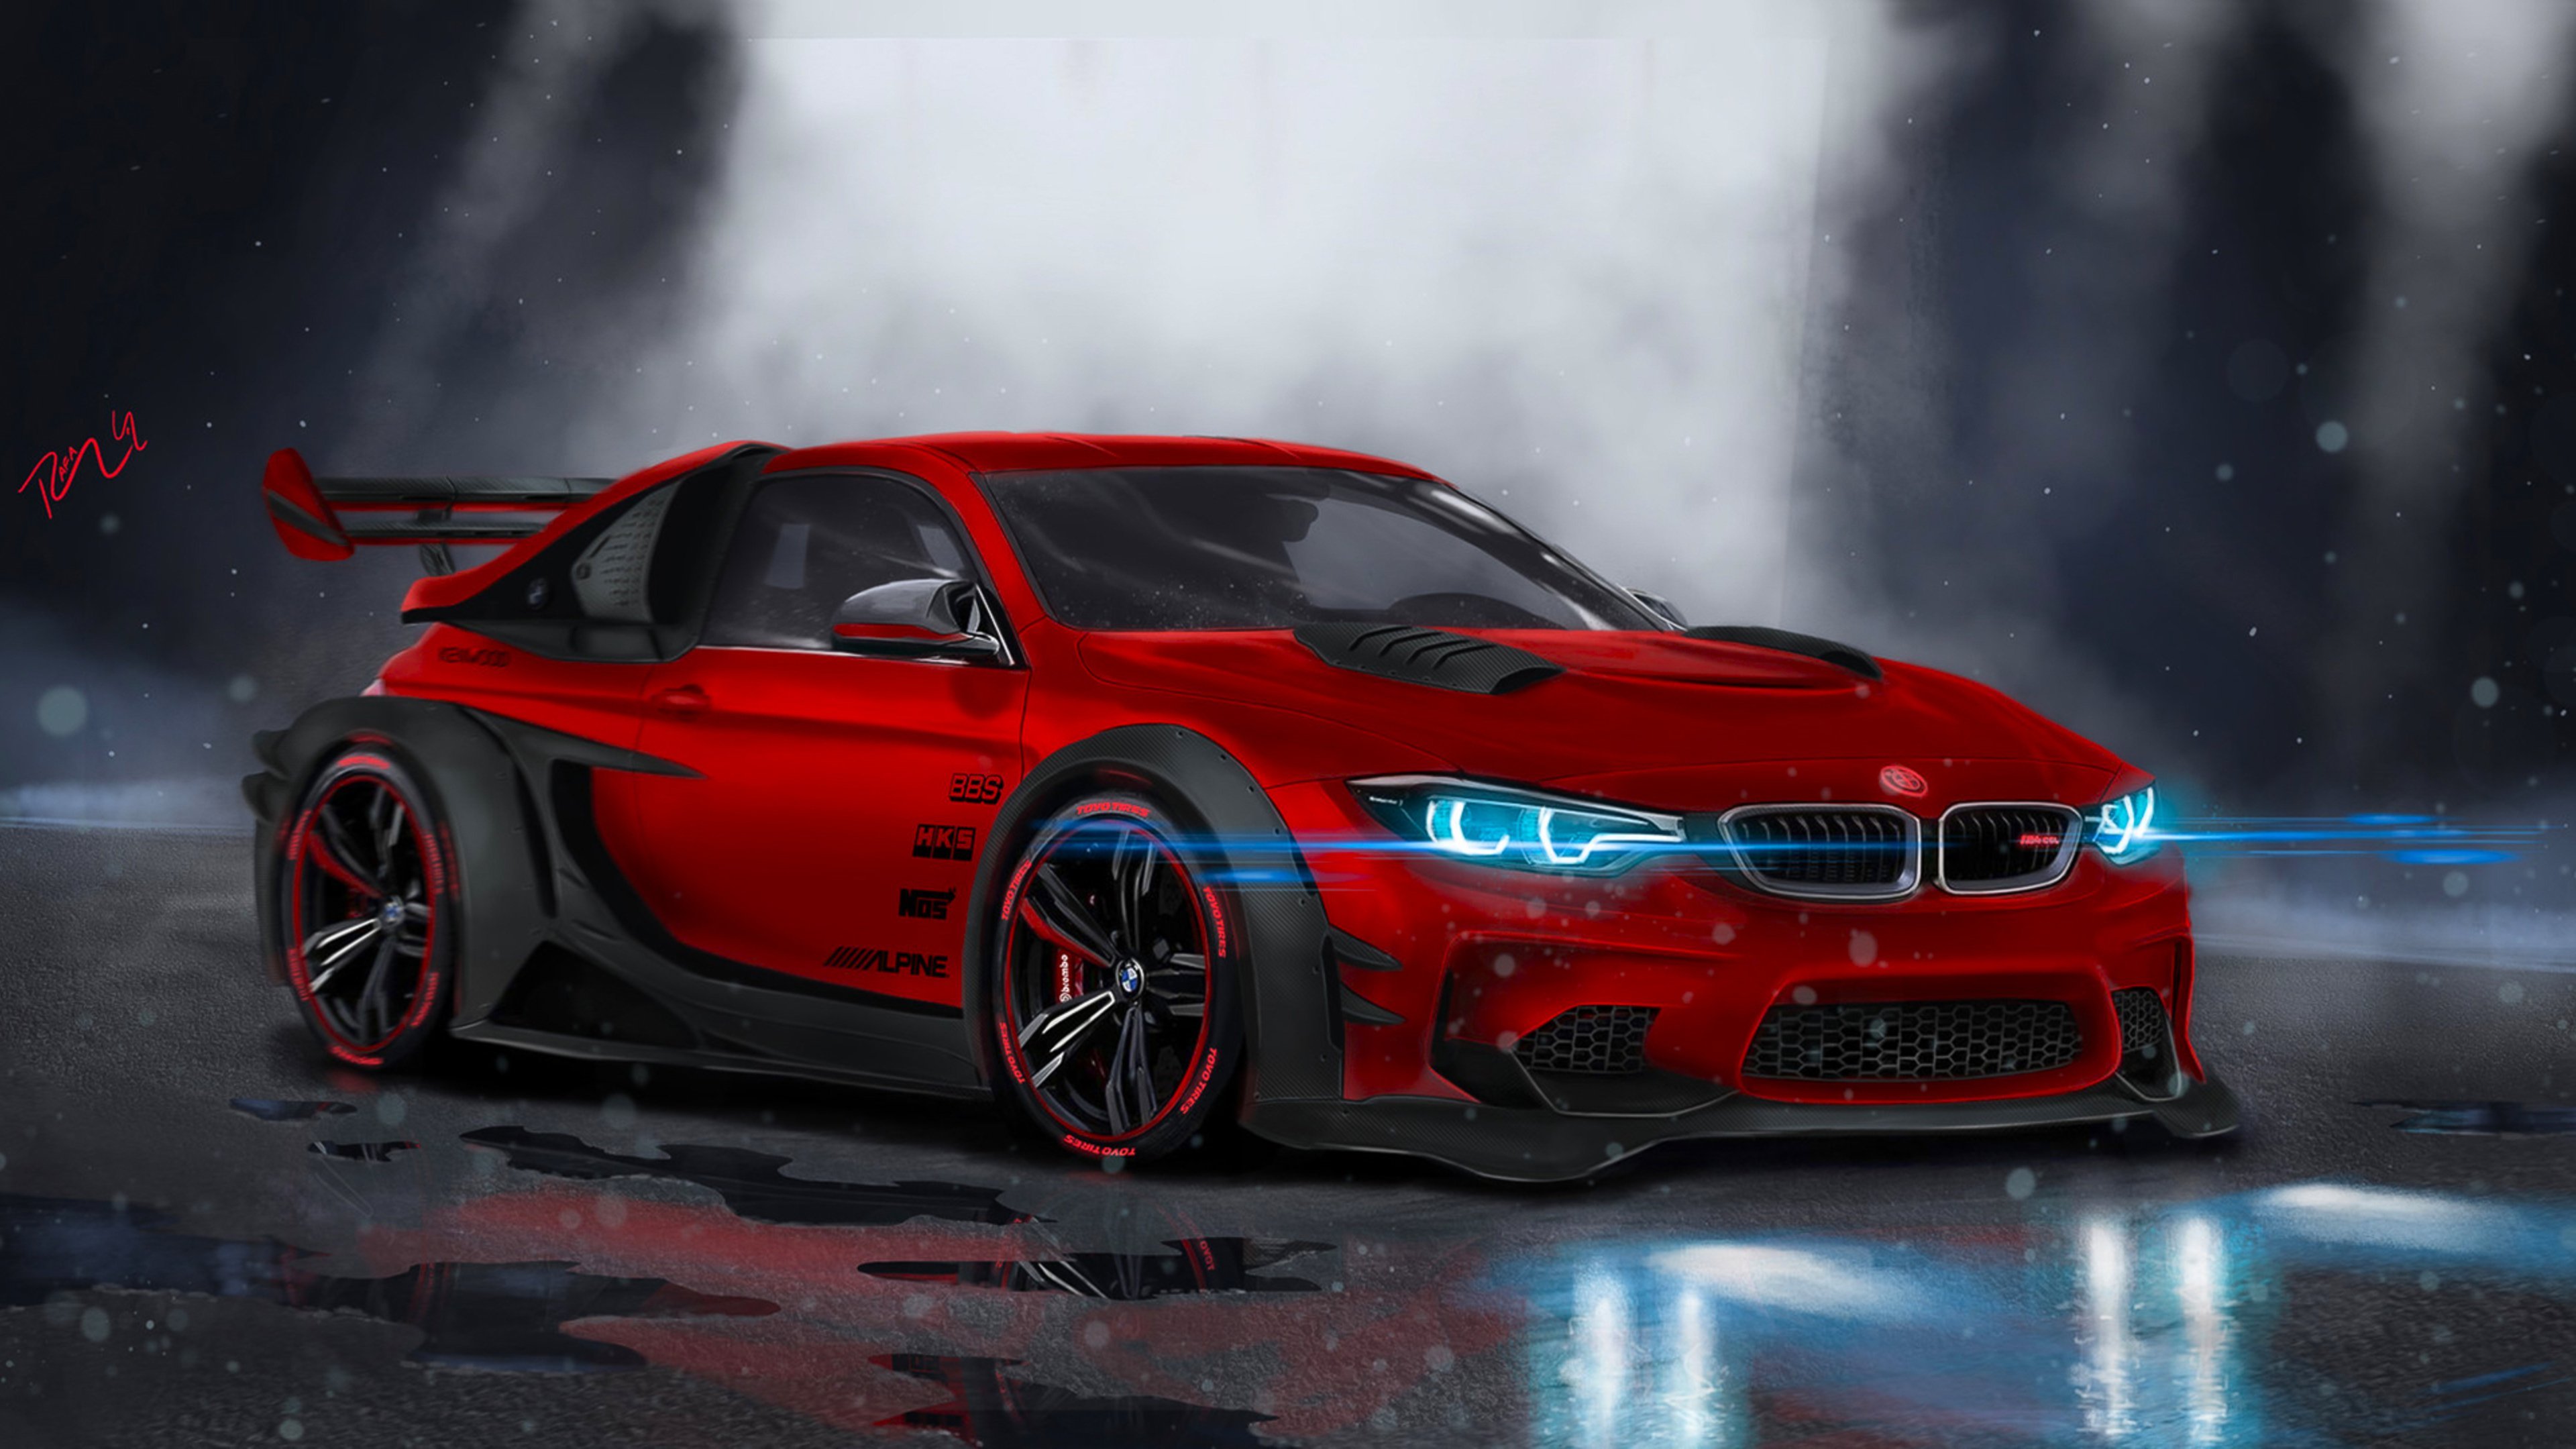 Bmw Modified Cars Wallpaper M4 Highly HD Audi